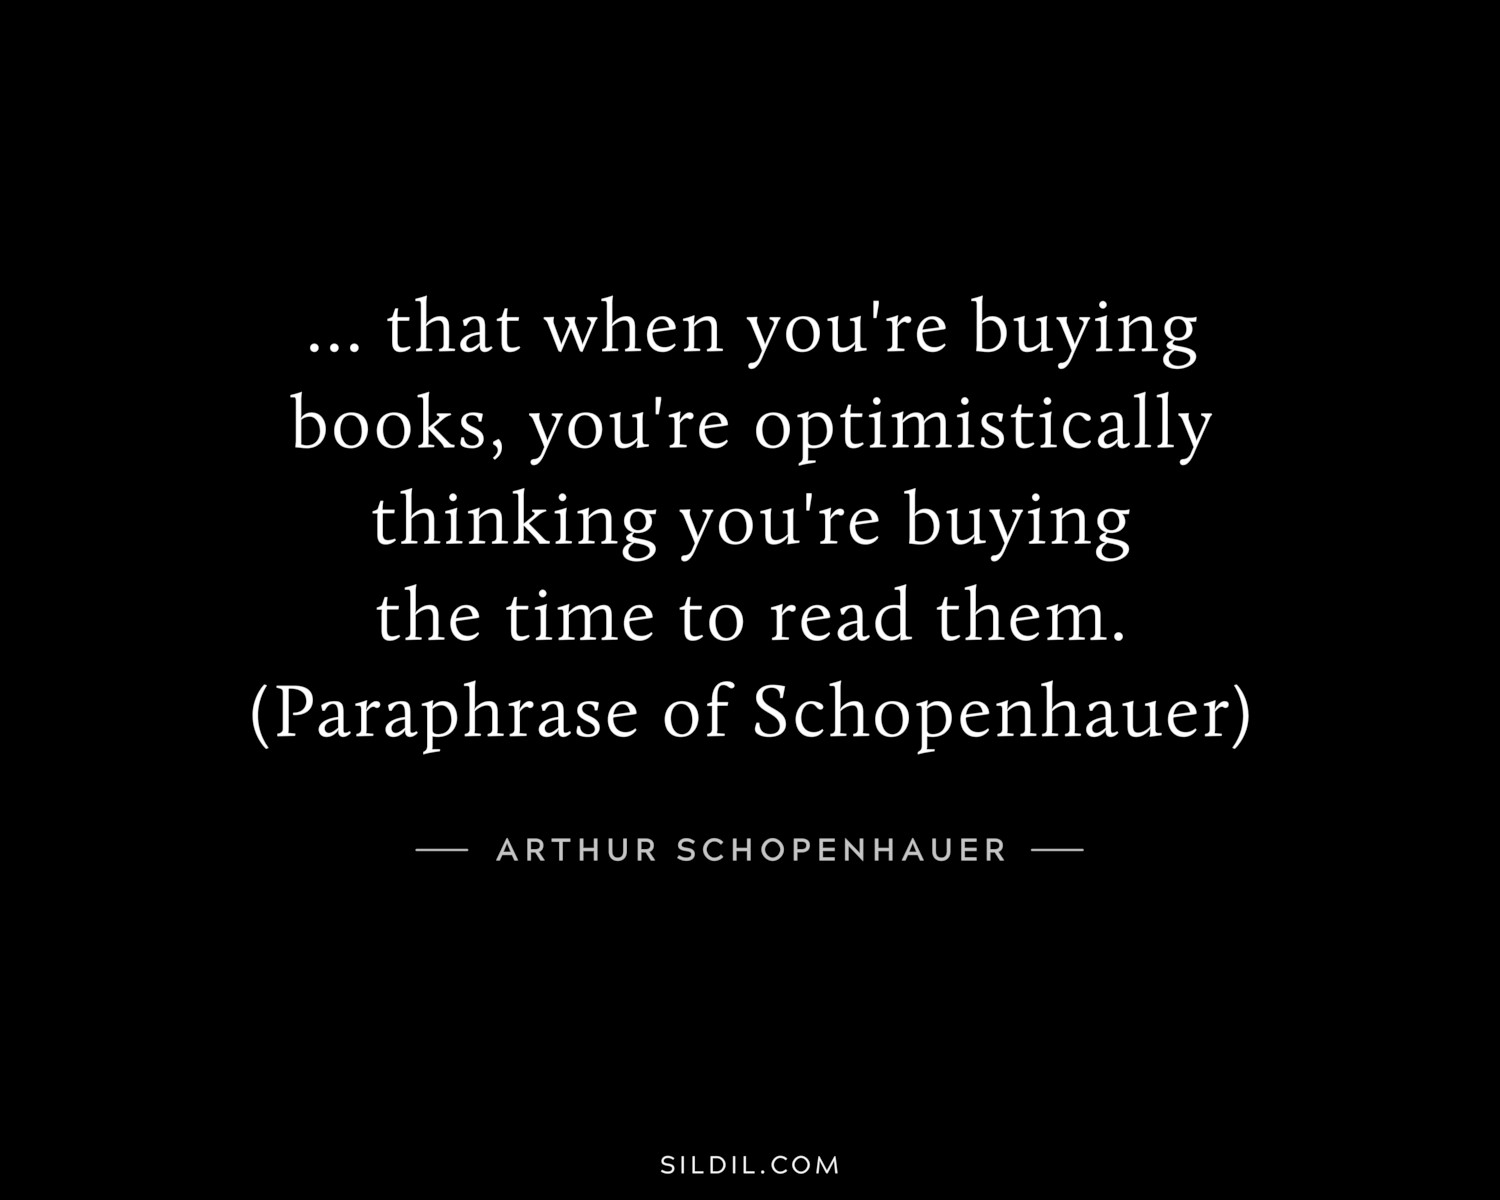 ... that when you're buying books, you're optimistically thinking you're buying the time to read them. (Paraphrase of Schopenhauer)